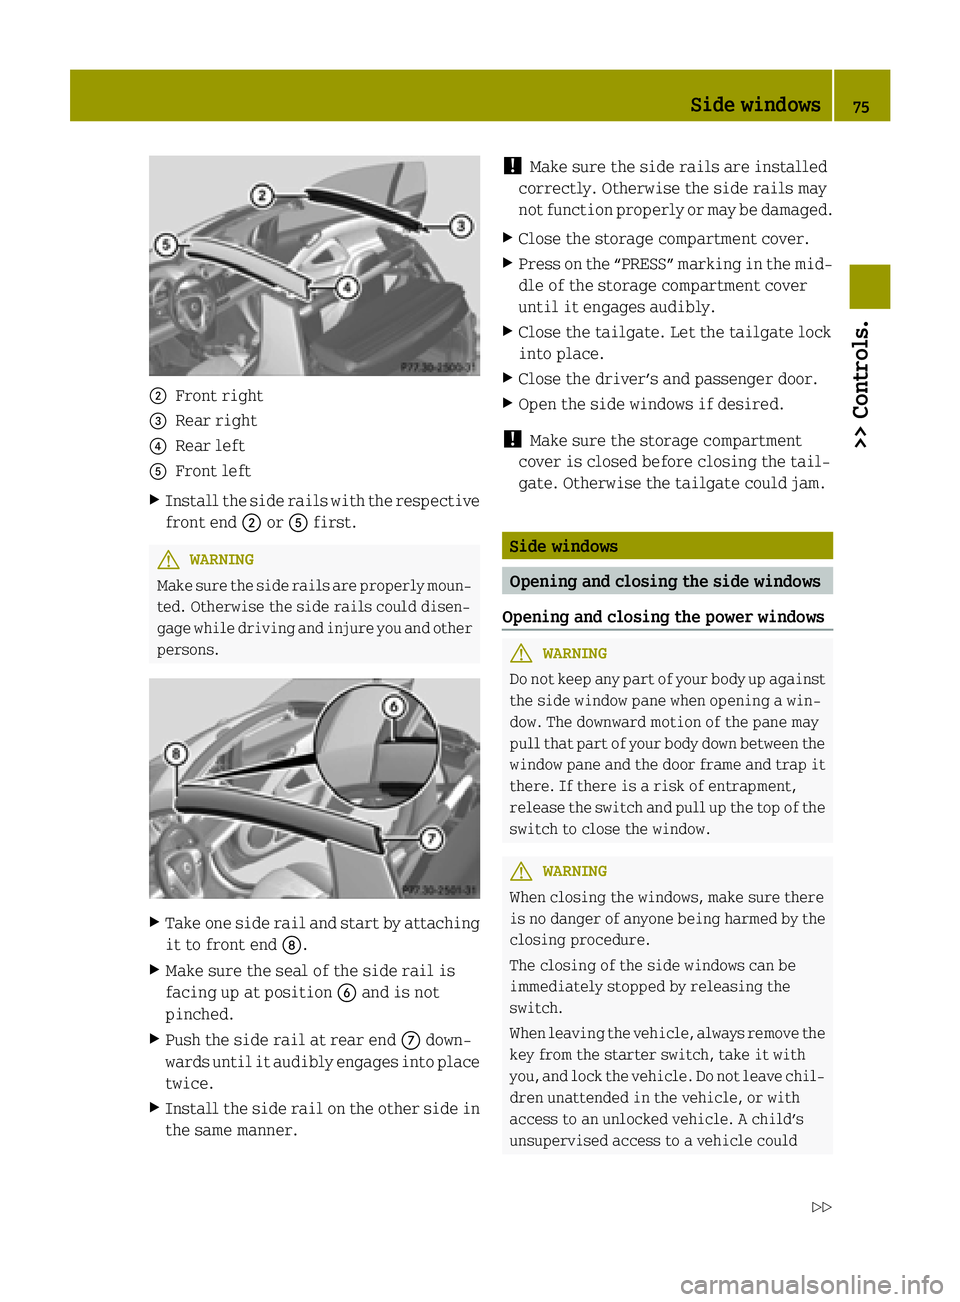 SMART FORTWO COUPE ELECTRIC DRIVE 2015 User Guide ;
Front right
= Rear right
? Rear left
A Front left
X Install the side rails with the respective
front end ;orA first. G
WARNING
Make sure the side rails are properly moun- ted. Otherwise the side rai